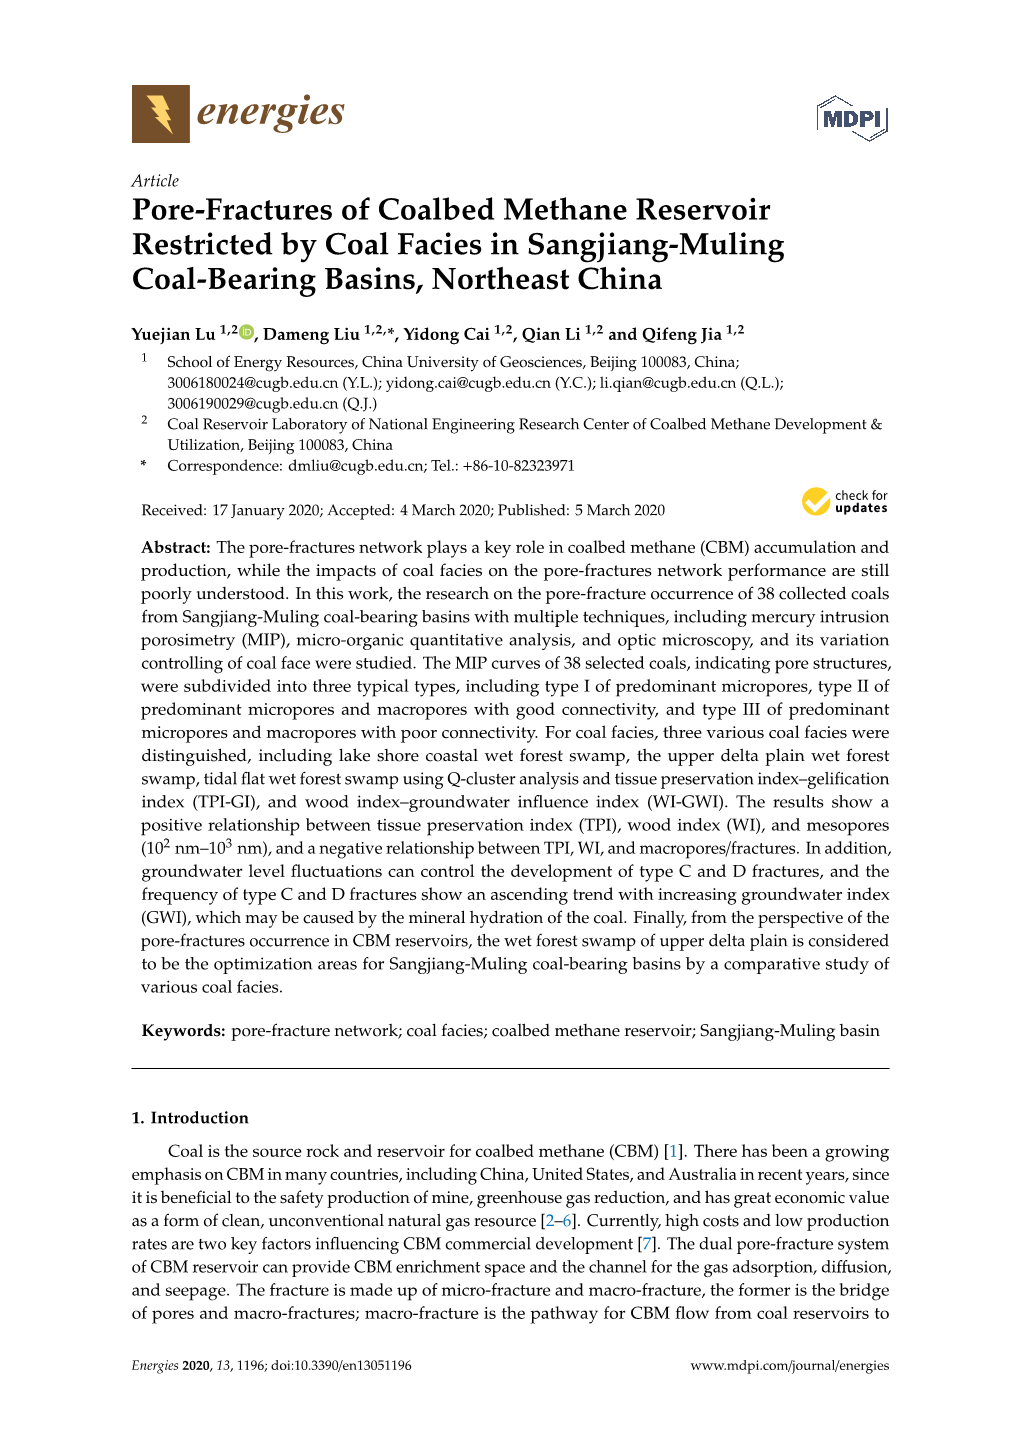 Pore-Fractures of Coalbed Methane Reservoir Restricted by Coal Facies in Sangjiang-Muling Coal-Bearing Basins, Northeast China